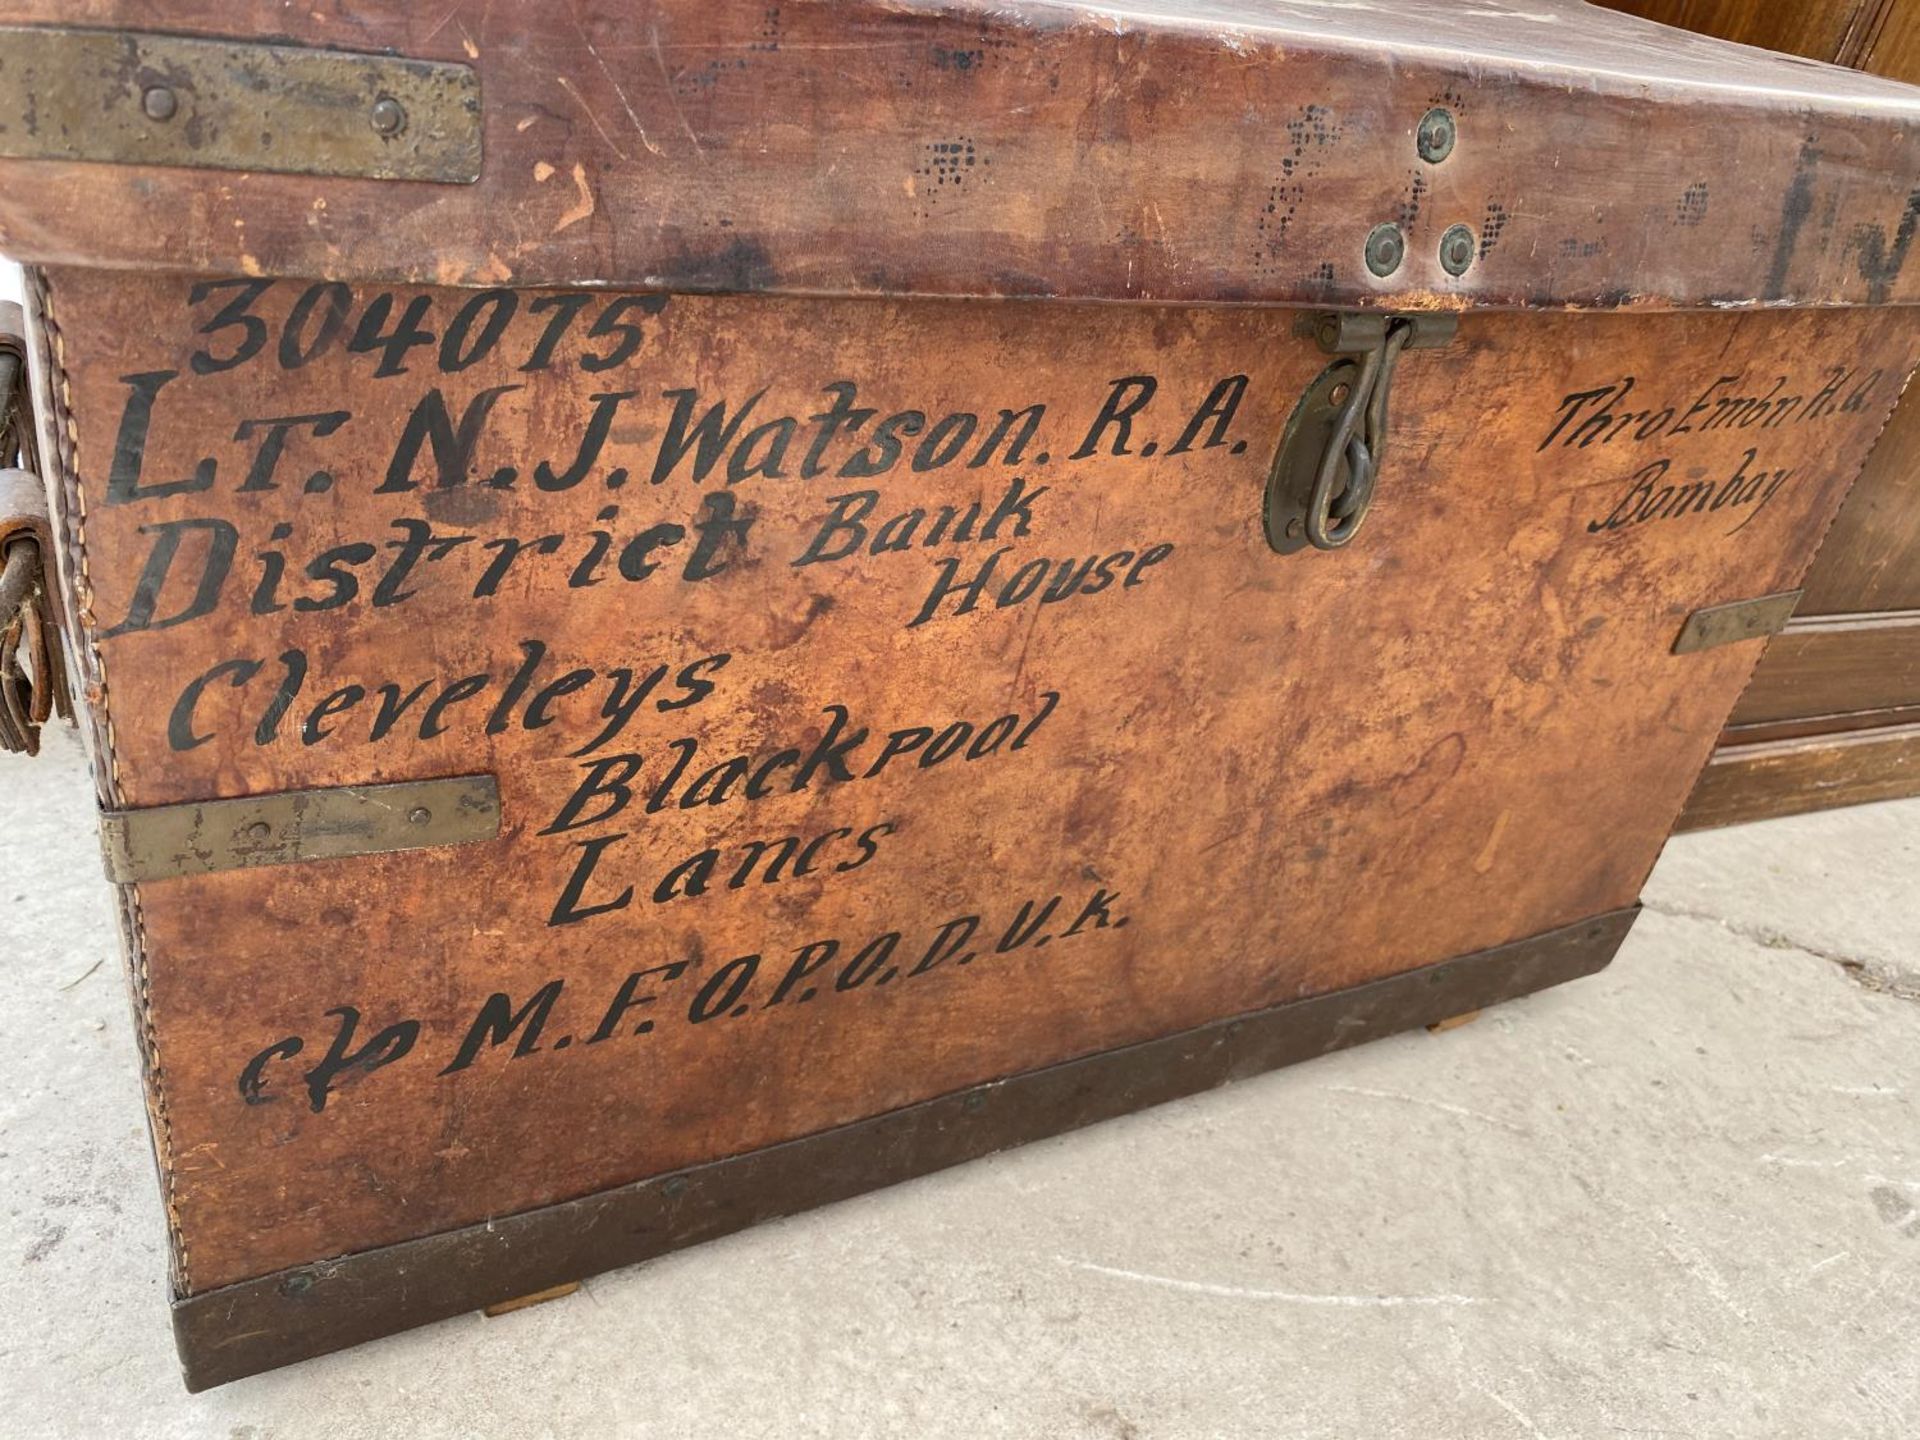 A 19TH CENTURY LEATHER OFFICERS TRAVELLING TRUNK (LT N.M.WATSON C/O MFOPODUK), ALSO INSCRIBED - Image 3 of 4